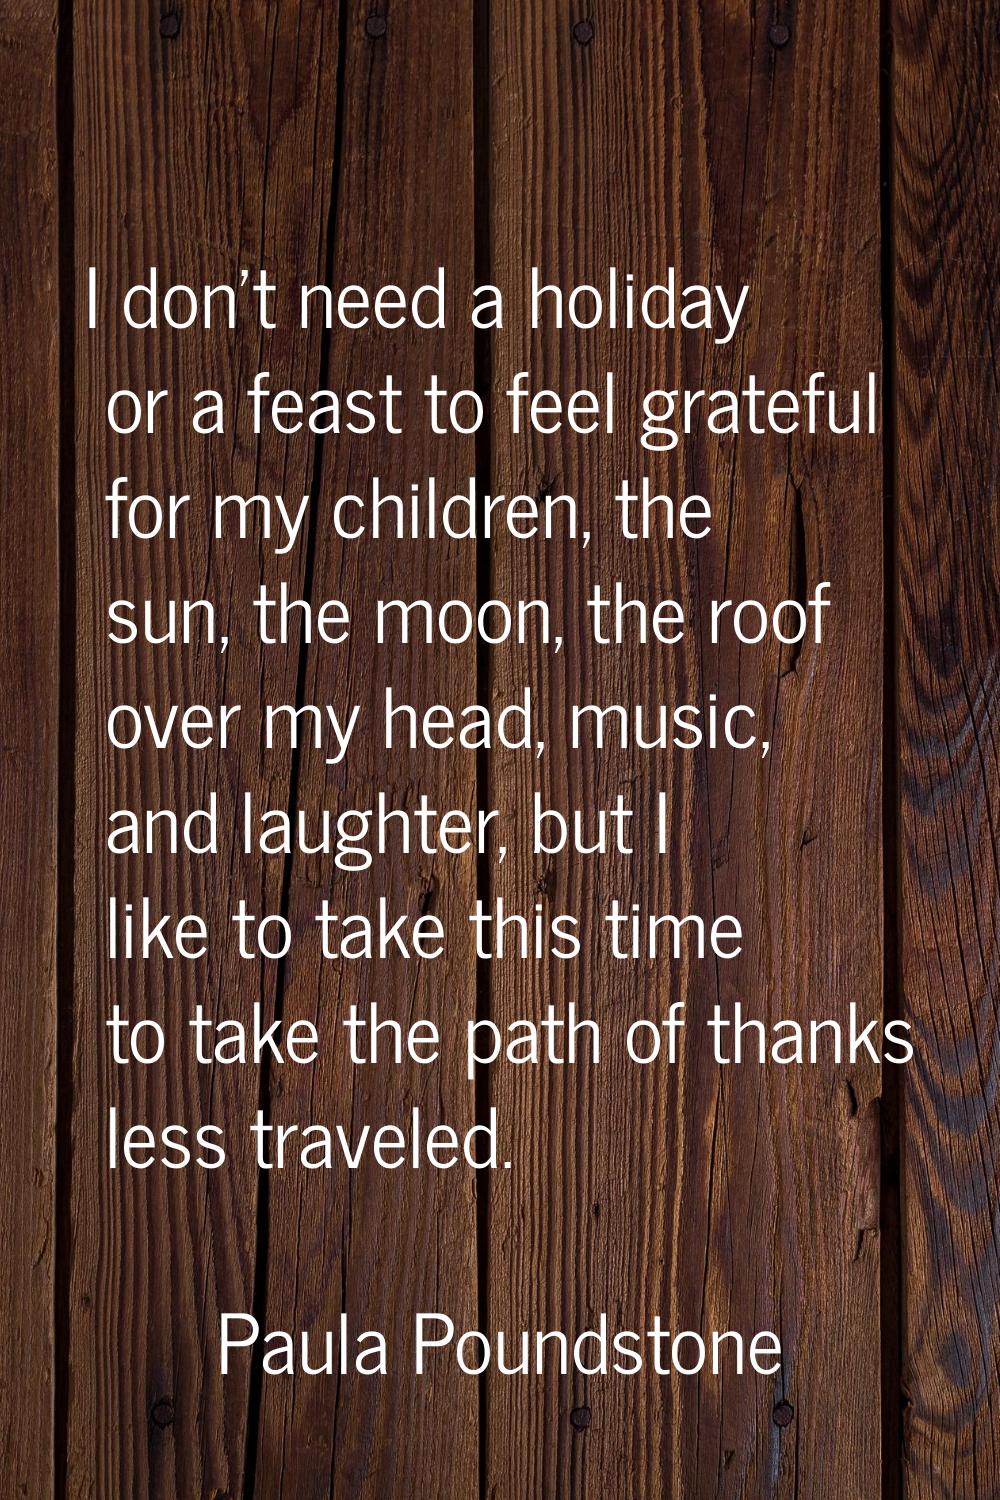 I don't need a holiday or a feast to feel grateful for my children, the sun, the moon, the roof ove